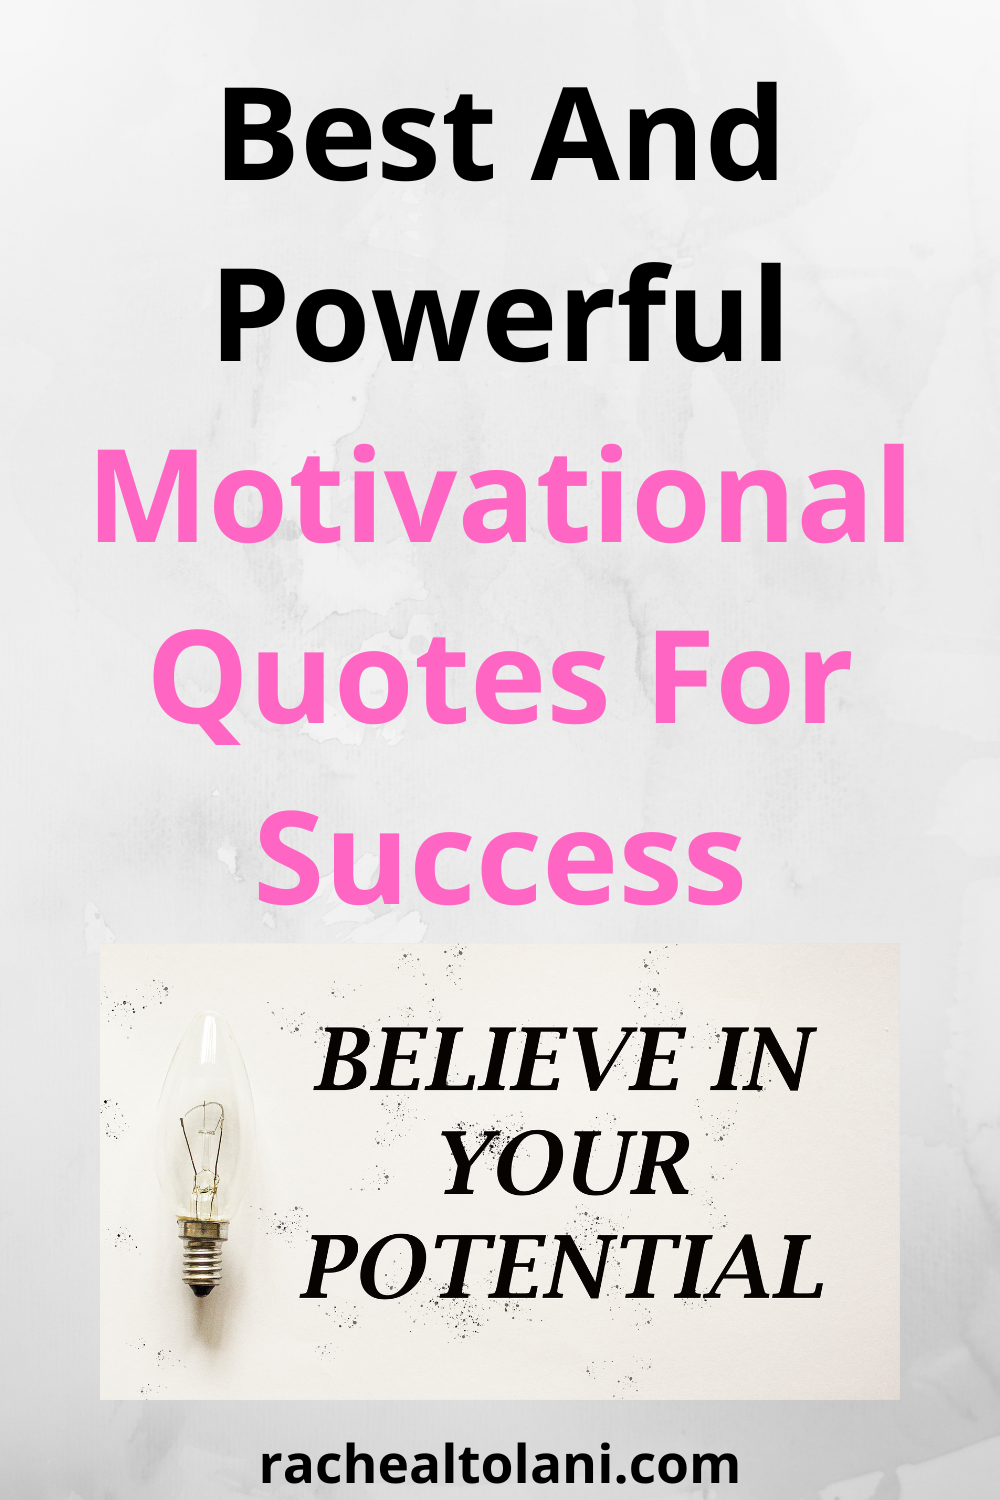 Motivational quotes for success